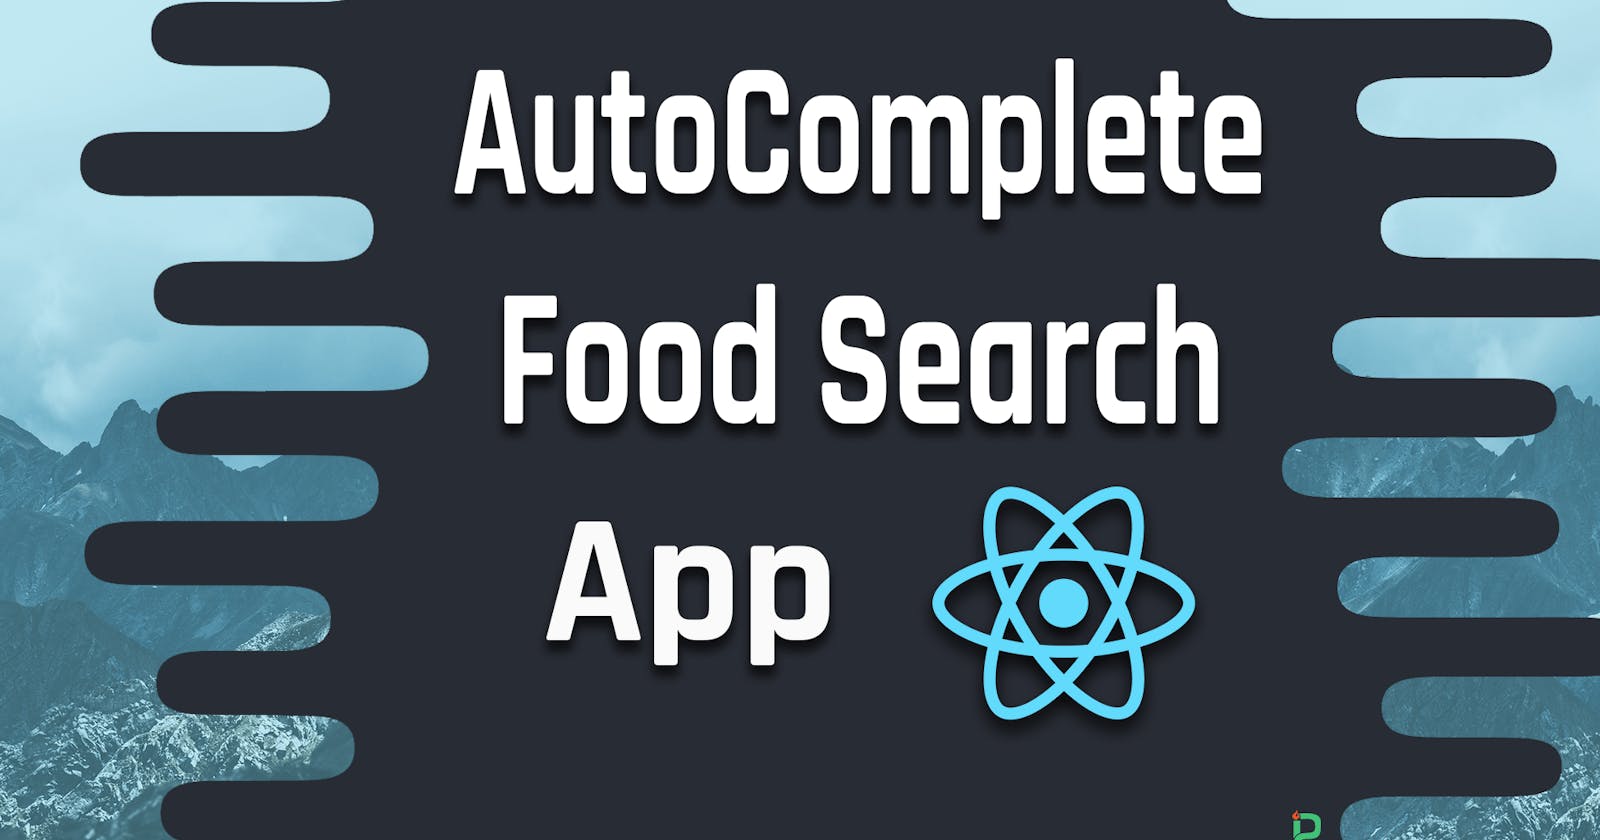 Let’s Create an Autocomplete Food Search App on React